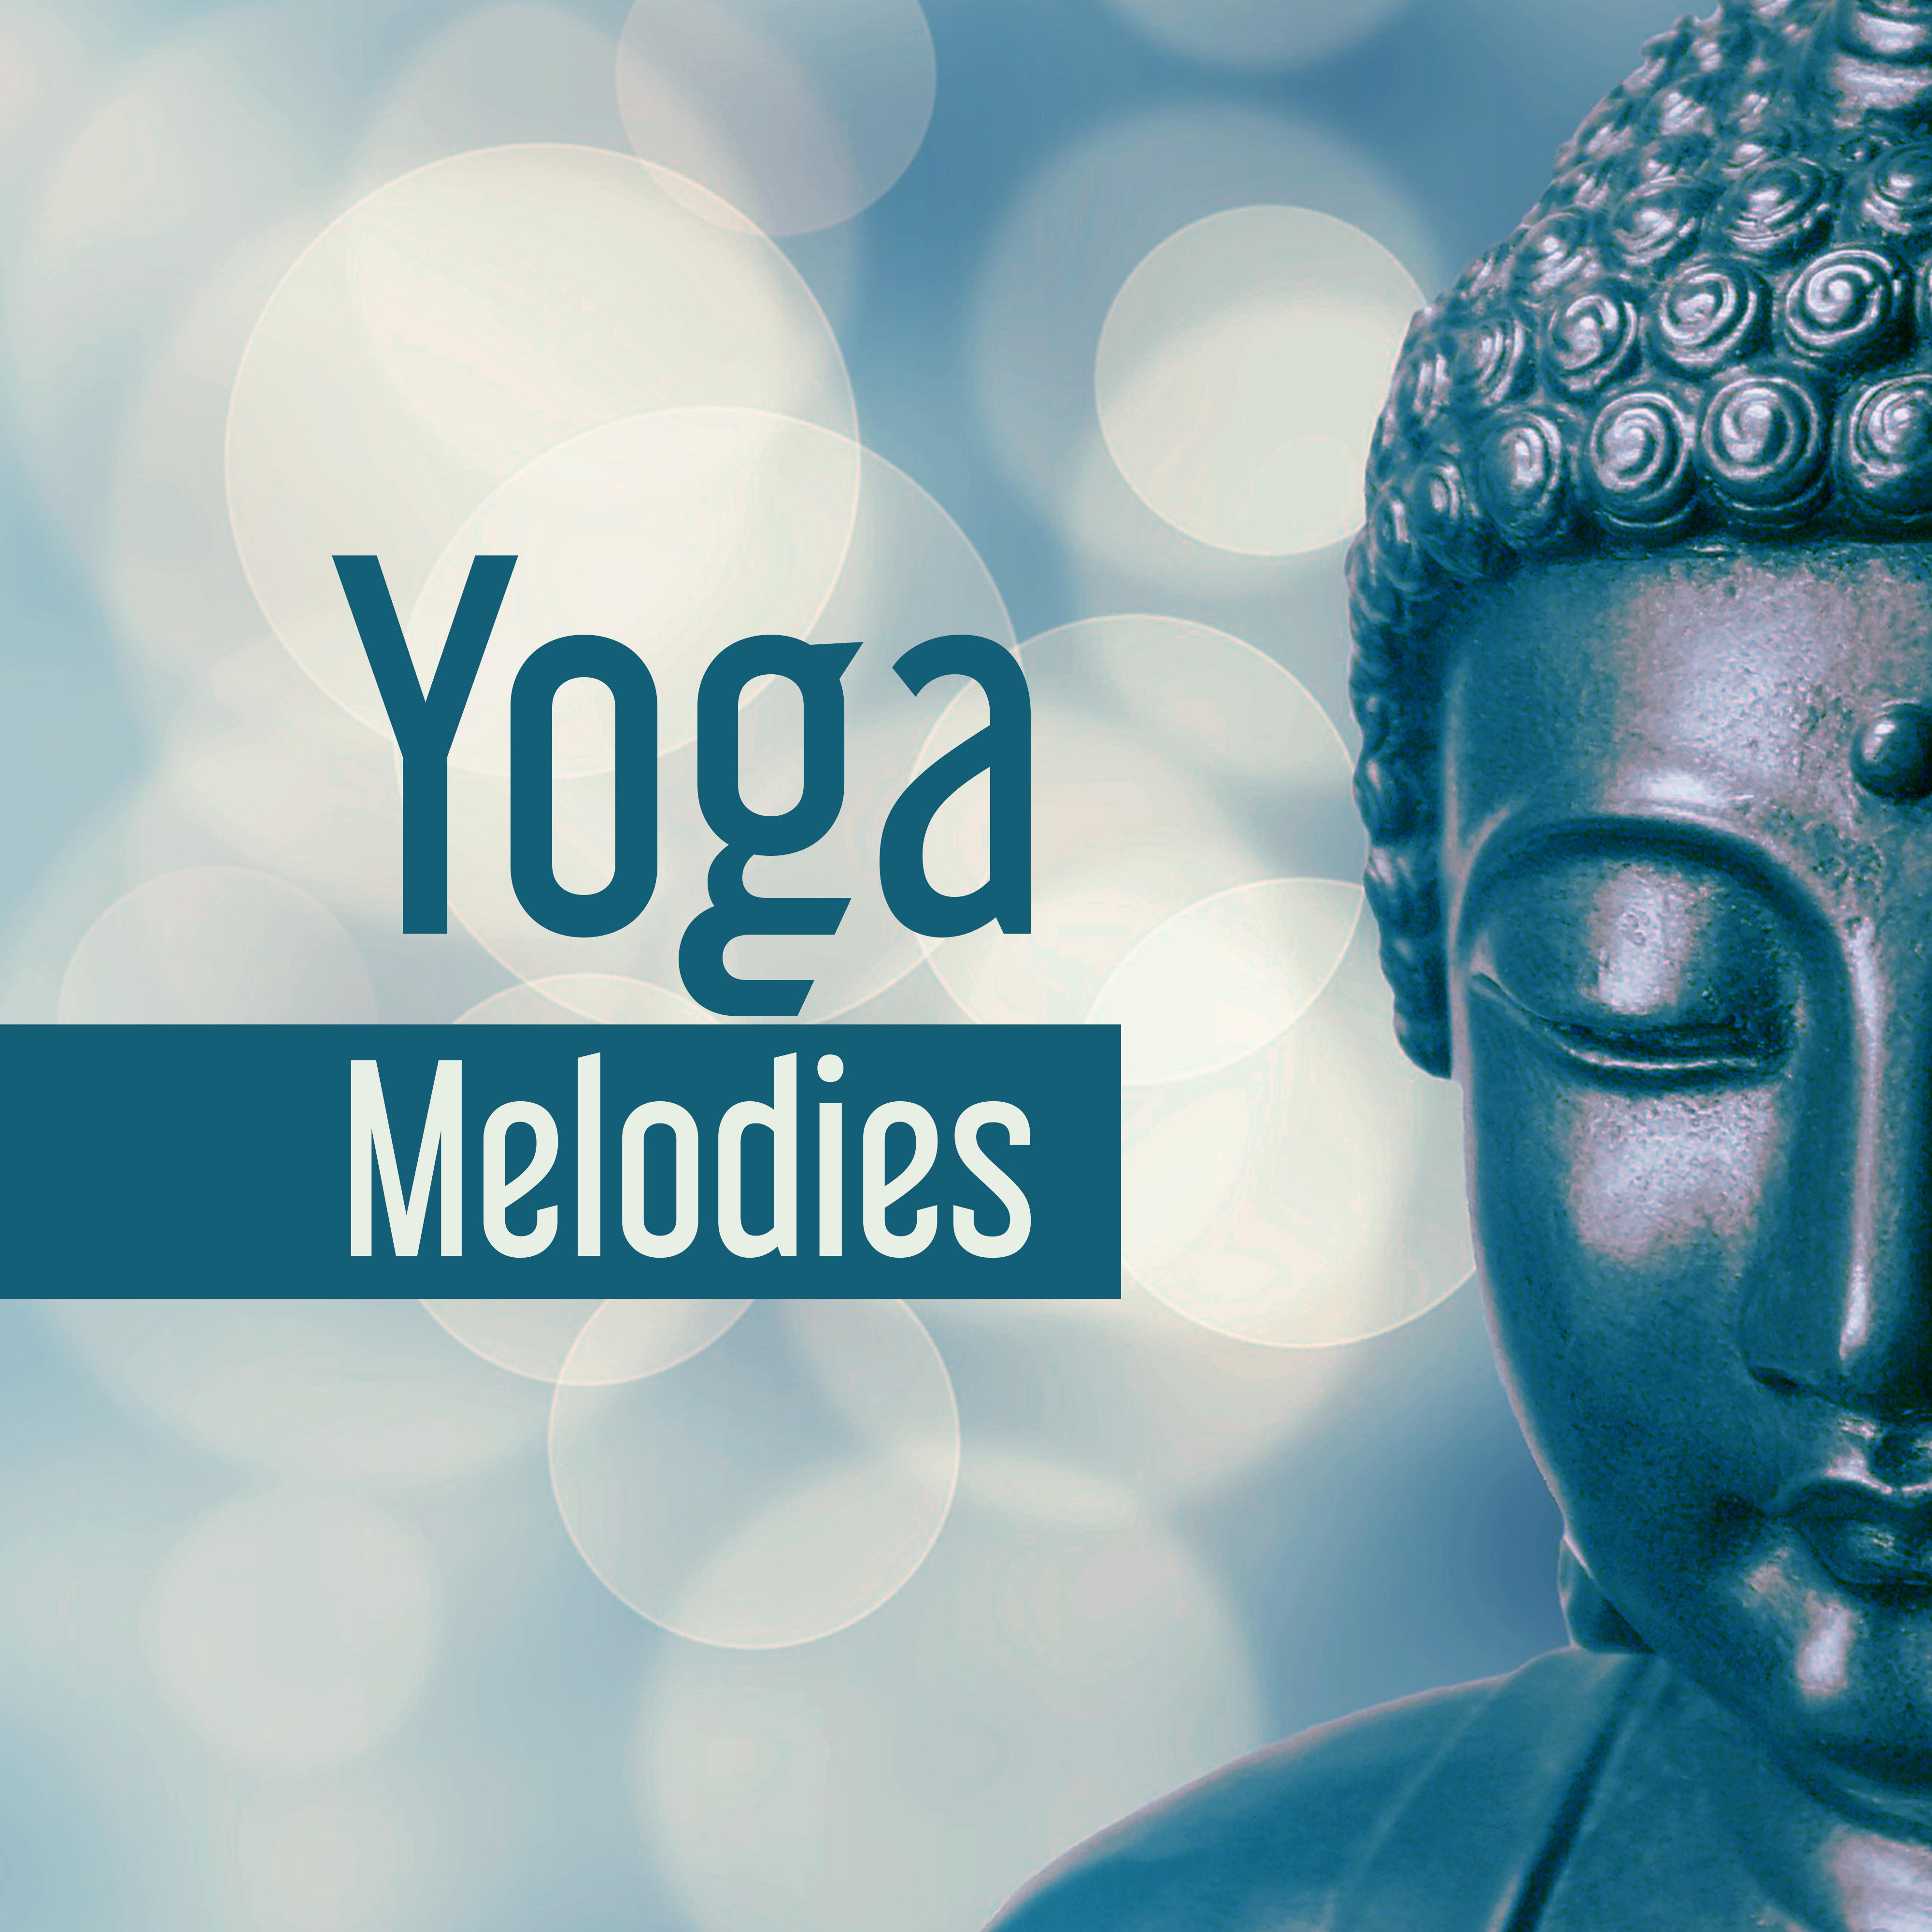 Yoga Melodies – The Greatest Relaxing Sounds for Yoga Practice, Meditation Background, Music for Yoga